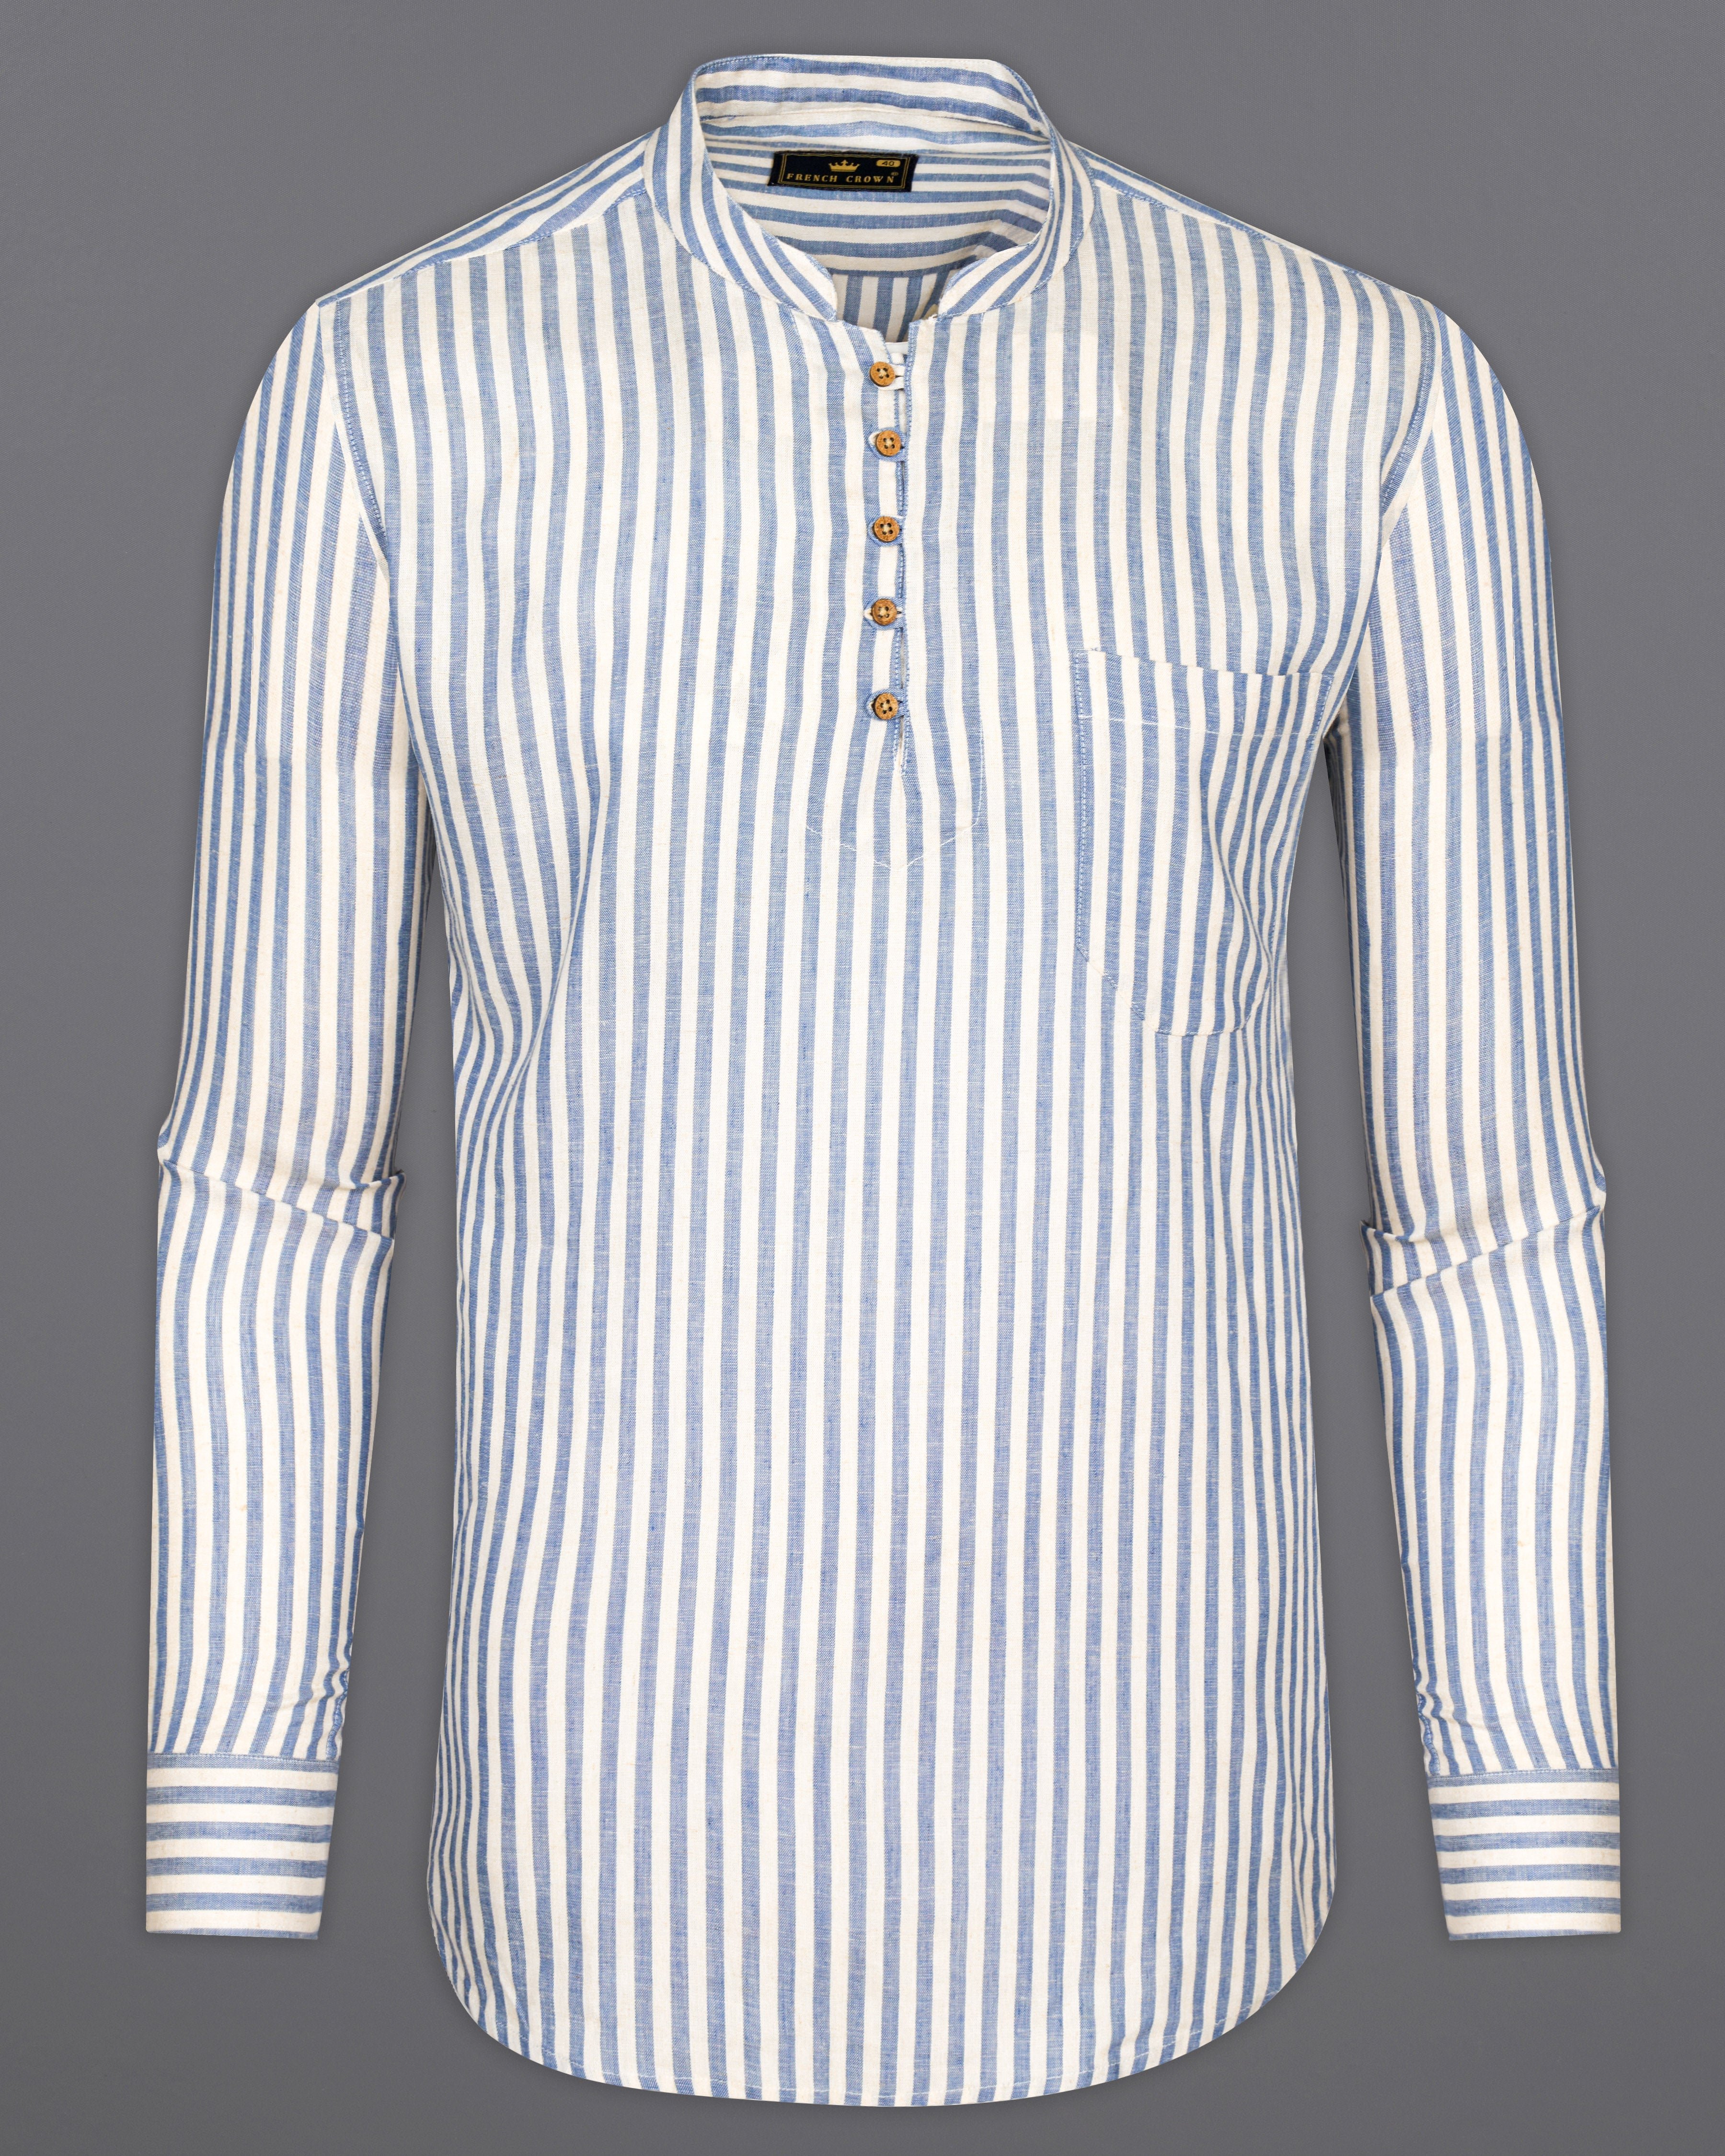 Heather Blue and White Striped Luxurious Linen Kurta Shirt 9783-KS-38, 9783-KS-H-38, 9783-KS-39, 9783-KS-H-39, 9783-KS-40, 9783-KS-H-40, 9783-KS-42, 9783-KS-H-42, 9783-KS-44, 9783-KS-H-44, 9783-KS-46, 9783-KS-H-46, 9783-KS-48, 9783-KS-H-48, 9783-KS-50, 9783-KS-H-50, 9783-KS-52, 9783-KS-H-52